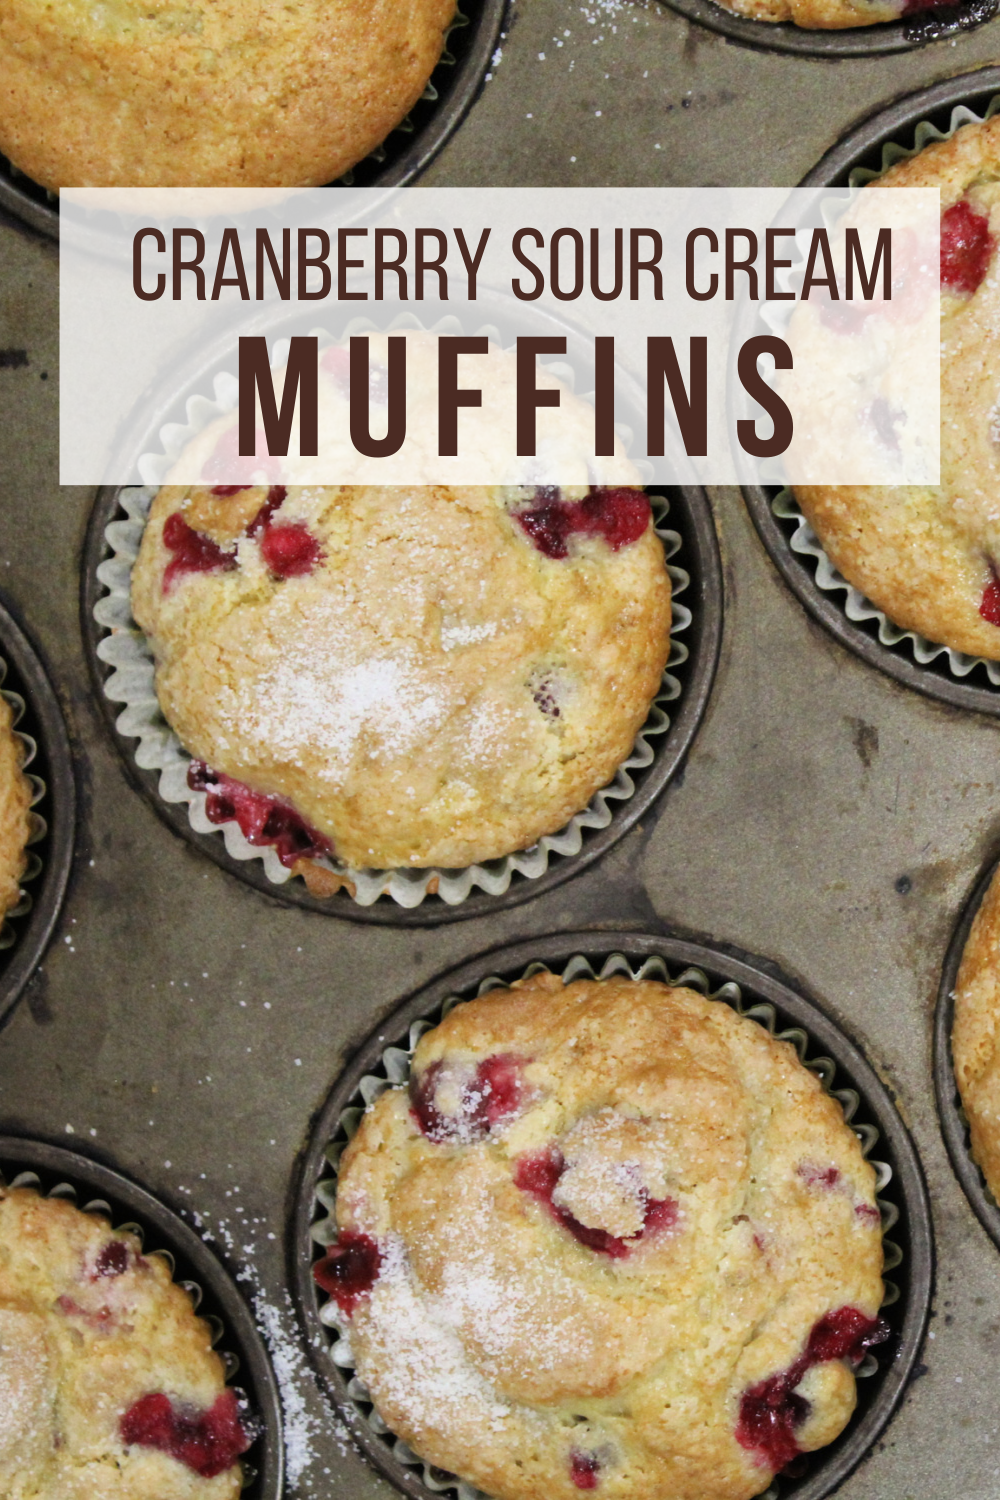 Fall flavors galore in these Cranberry Sour Cream Muffins - bakery sweet, soft, and fluffy muffins topped with a sprinkling of sugar and beautifully enjoyed for your next breakfast!